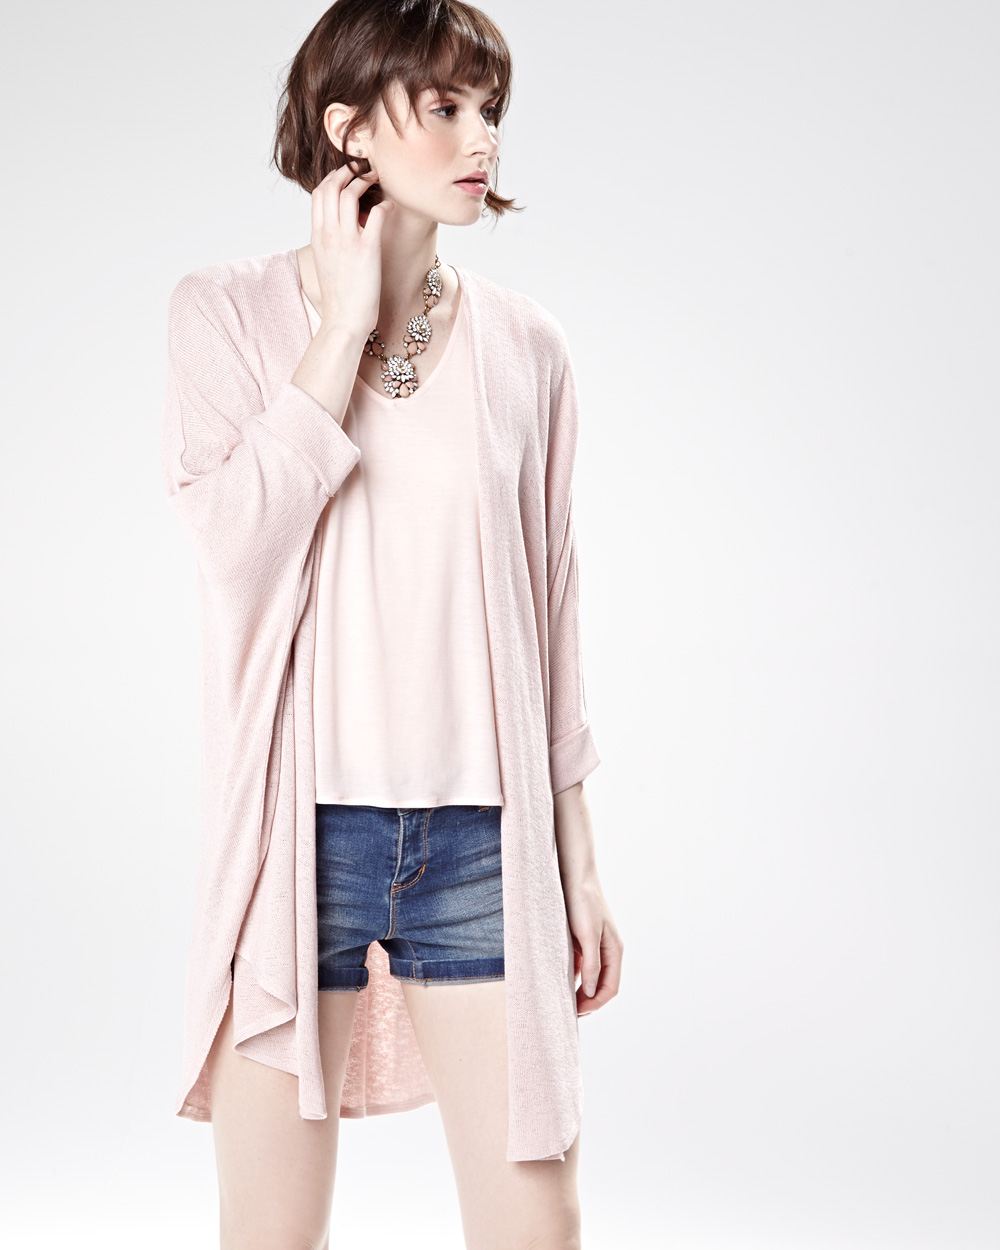 Loose knit open-front cardigan | RW&CO.